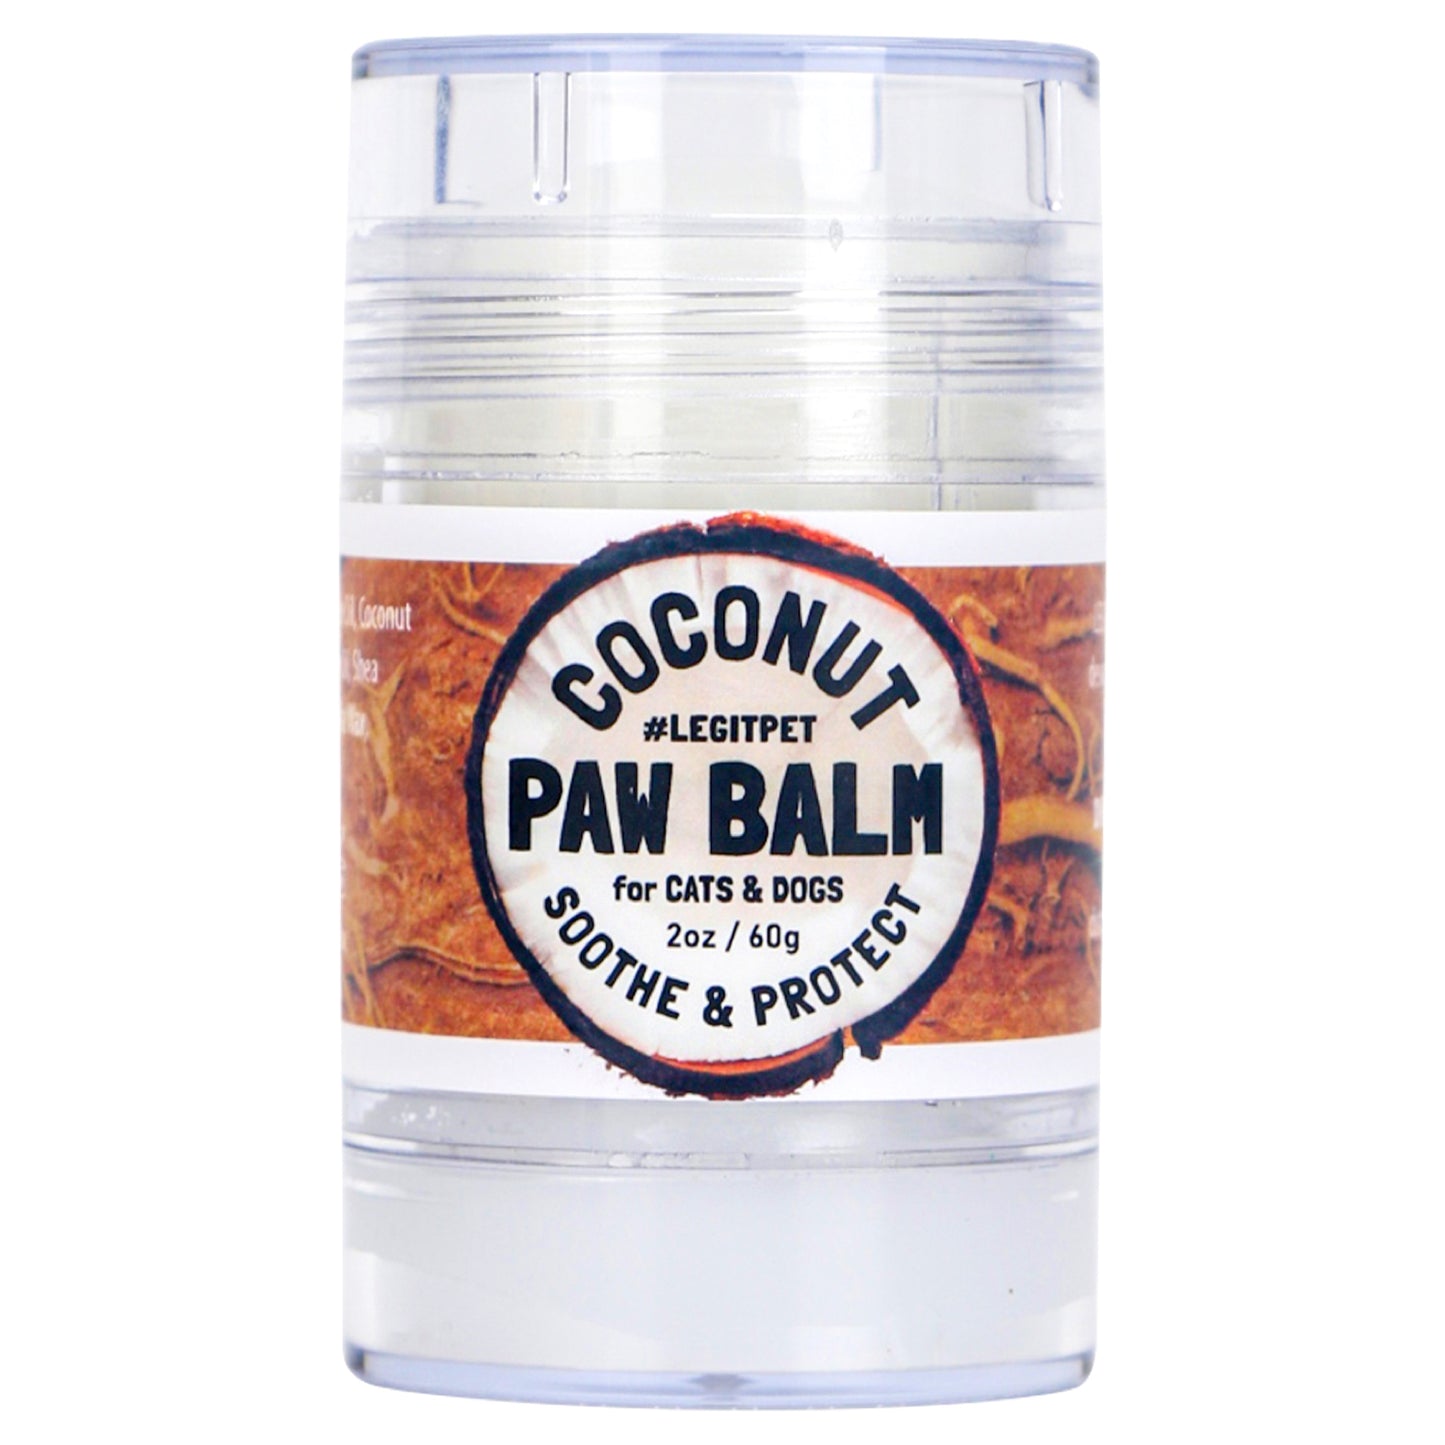 Dog Paw Balm Stick with coconut oil, shea butter & beeswax